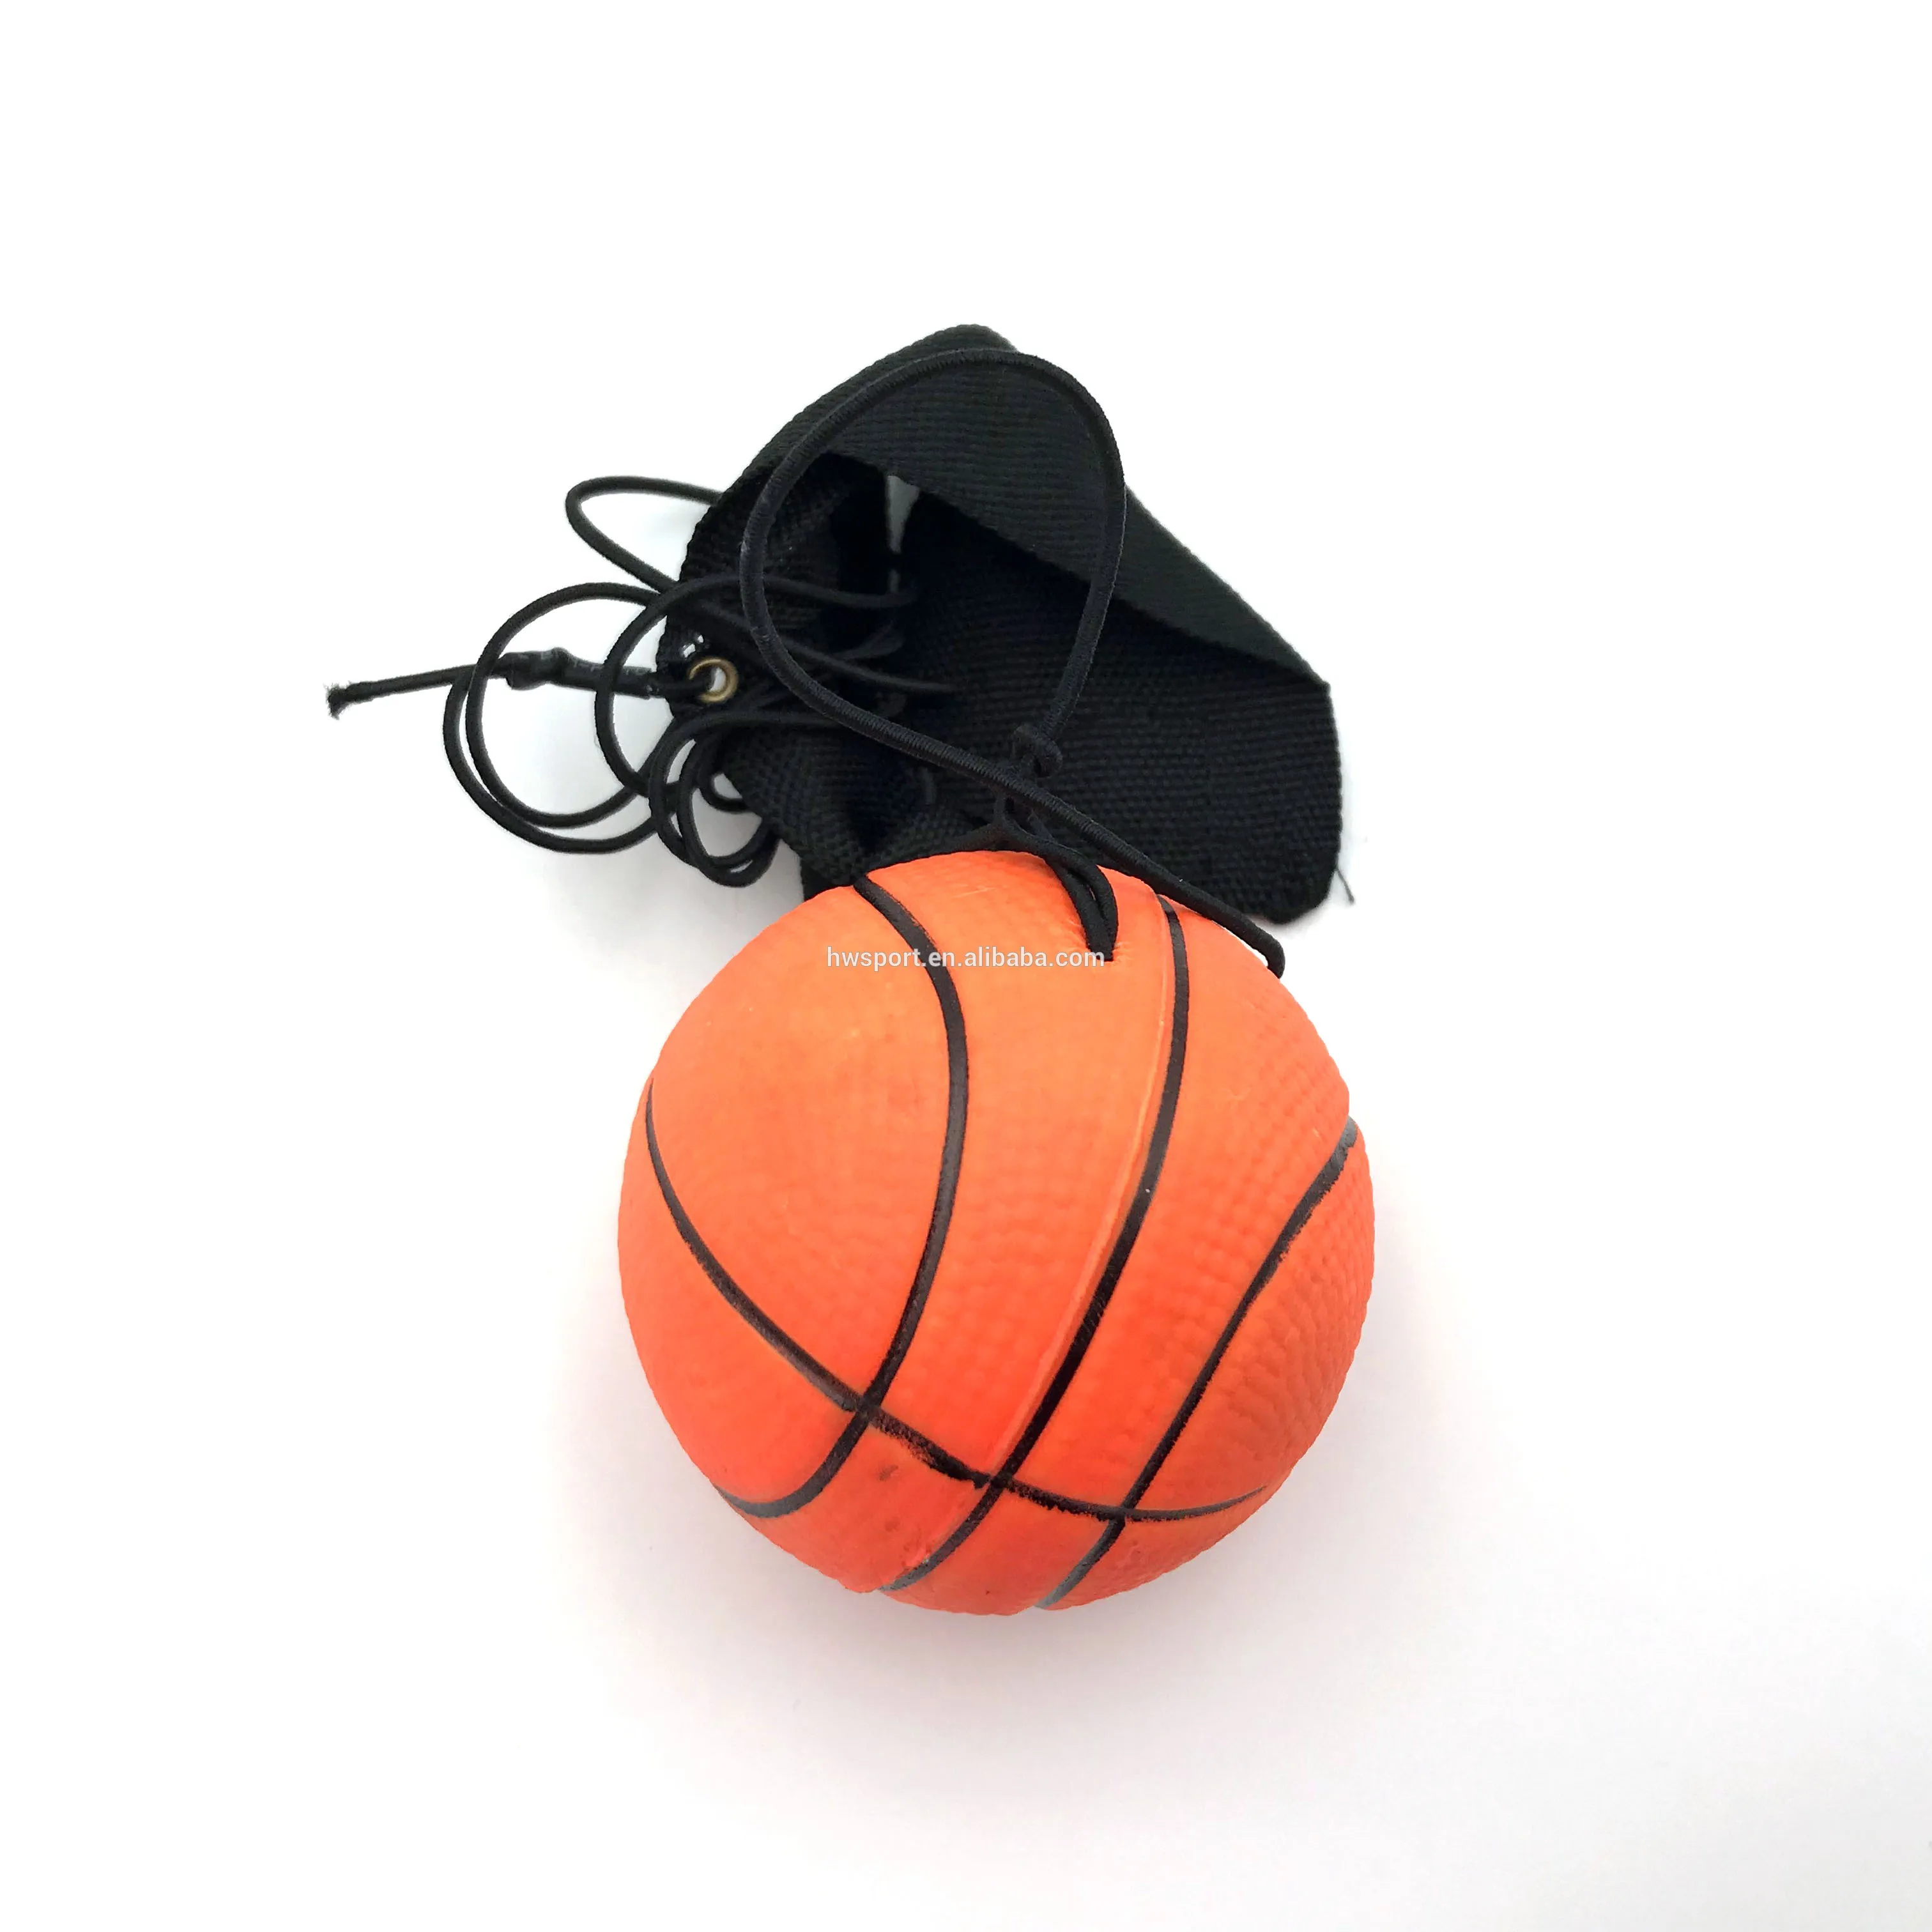 ball on string toy